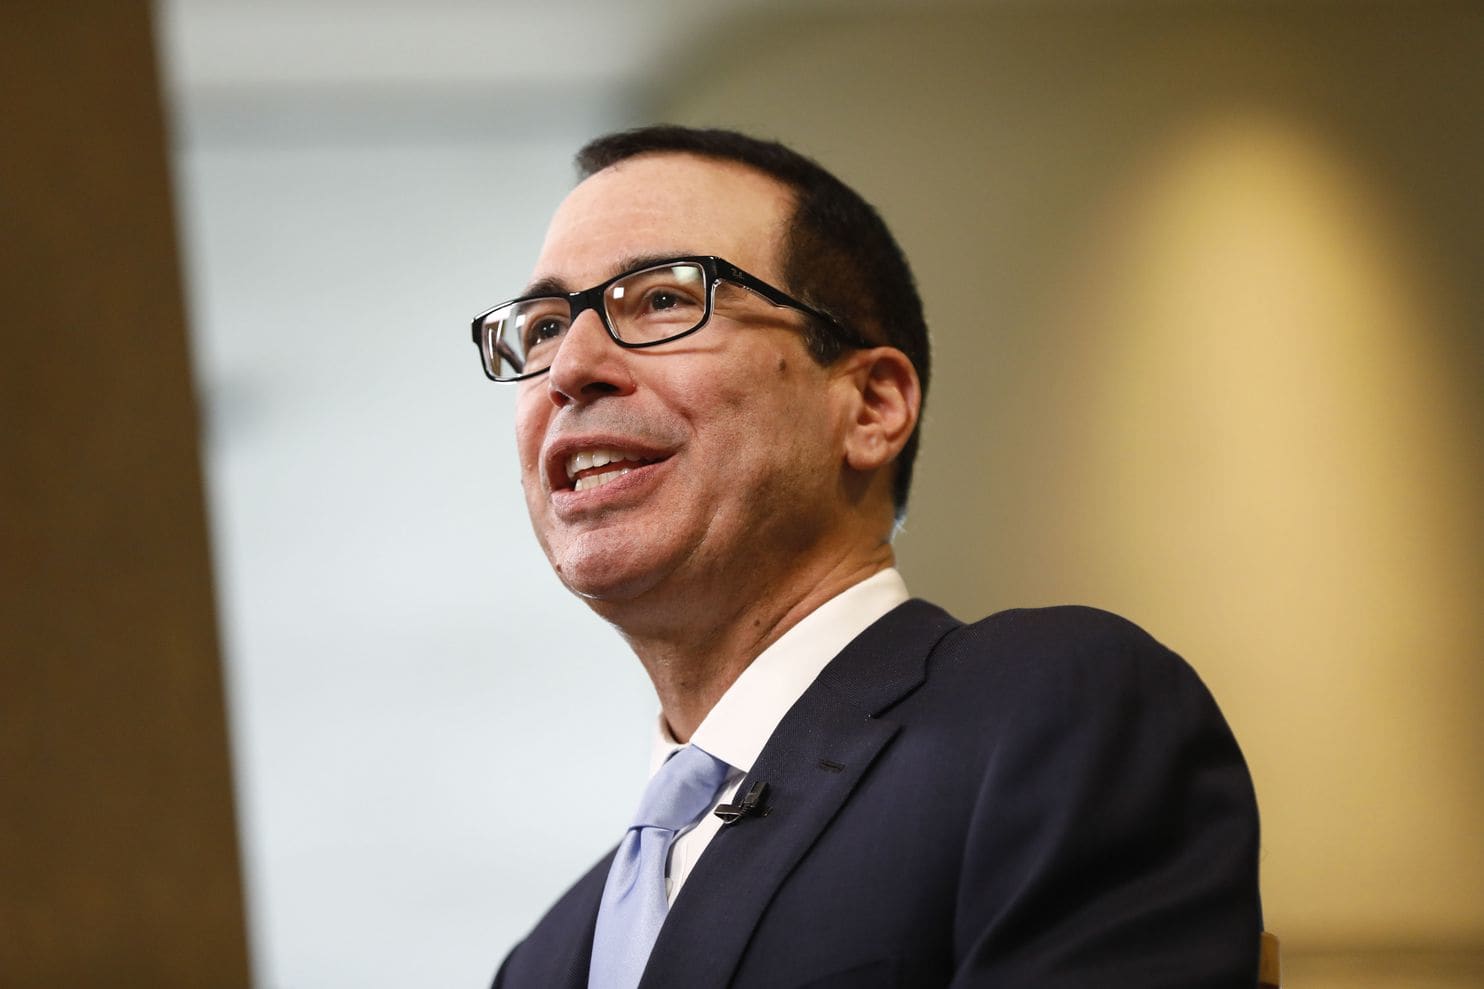 So What If Steven Mnuchin Likes A $20 Wine? That Just Means This Millionaire Knows Value. photo